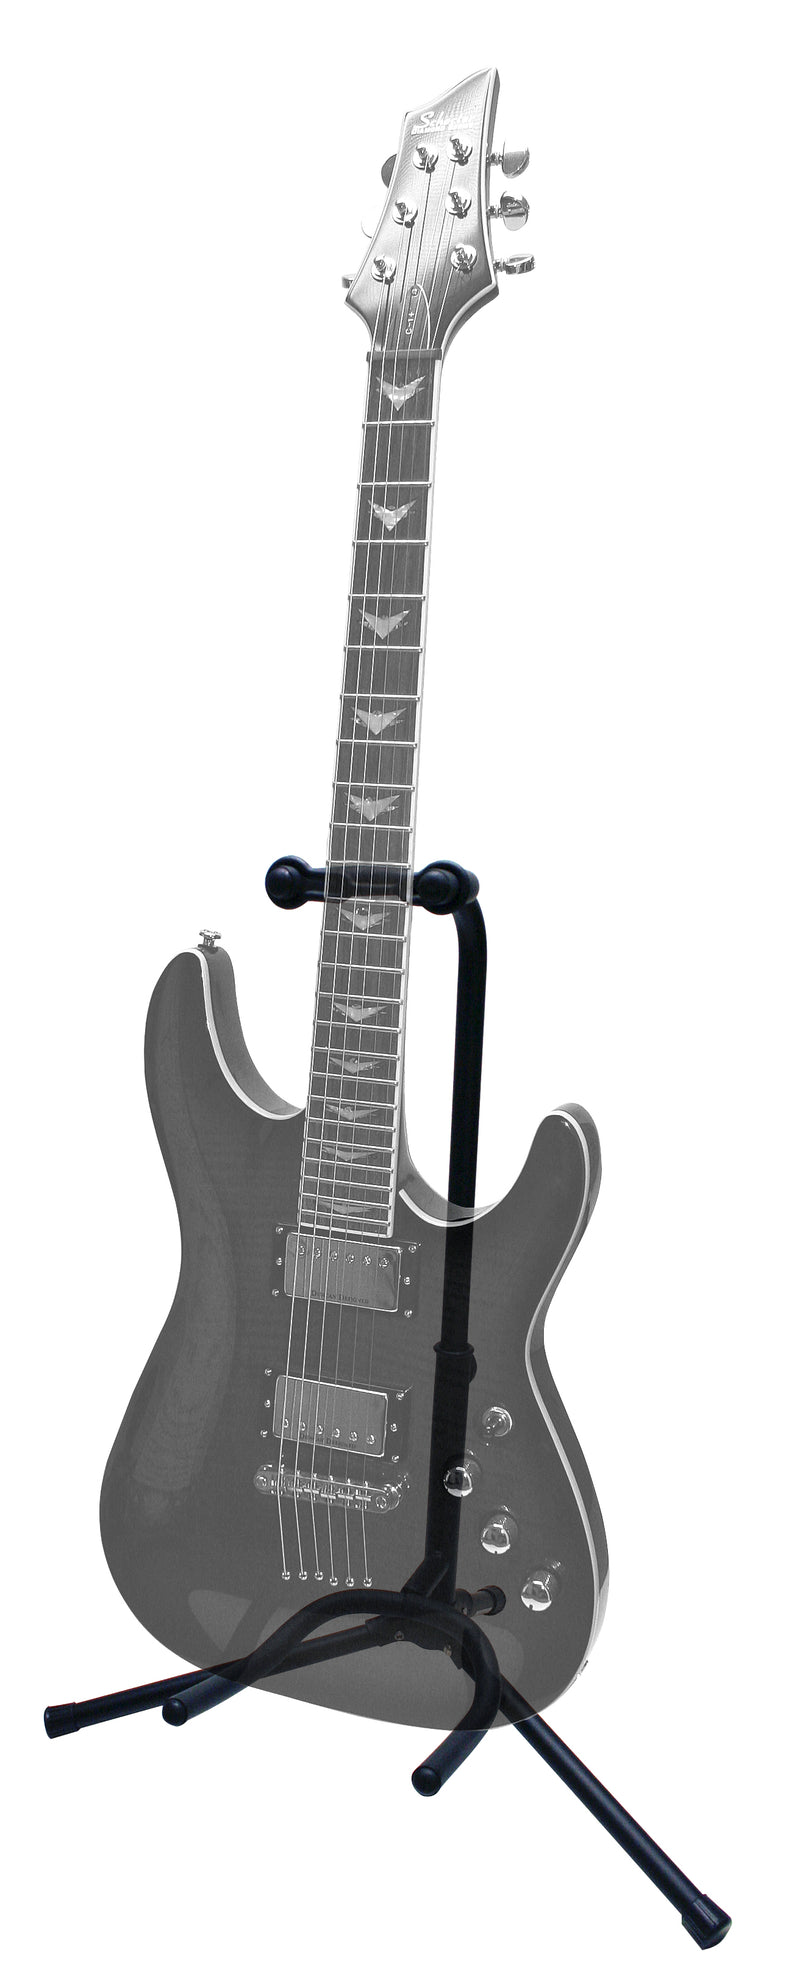 GATOR RI-GTRSTD-1 Rok-it by Gator Guitar stand • Padded body and neck • Ideal for electric or acoustic guitars • Minimum Height: 20 Inches /508mm • Maximum Height: 25 Inches /635mm